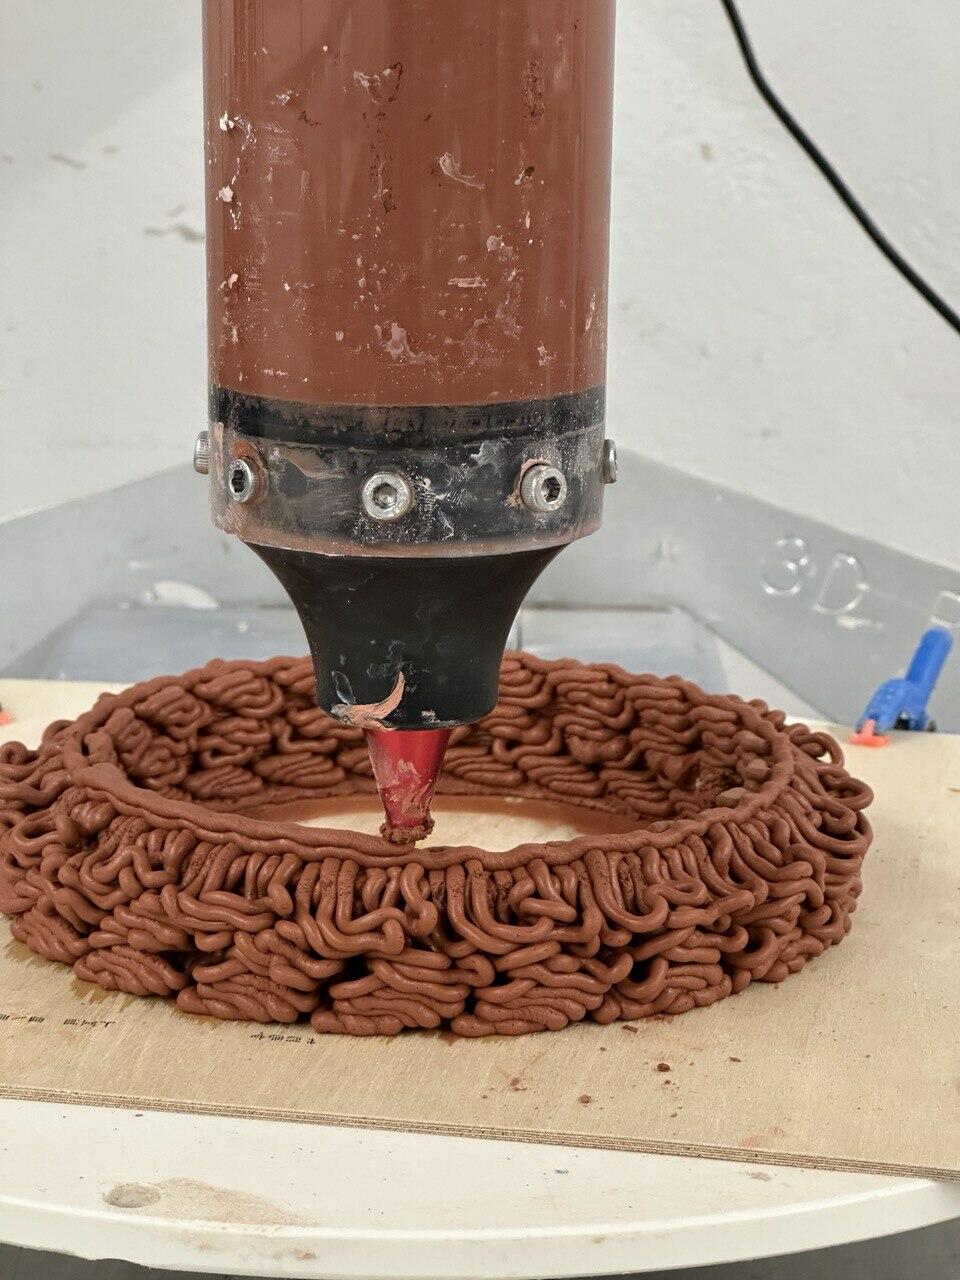 3D printer nozzle depositing intricate, layered clay structure onto a wooden platform, capturing the detailed formation process.